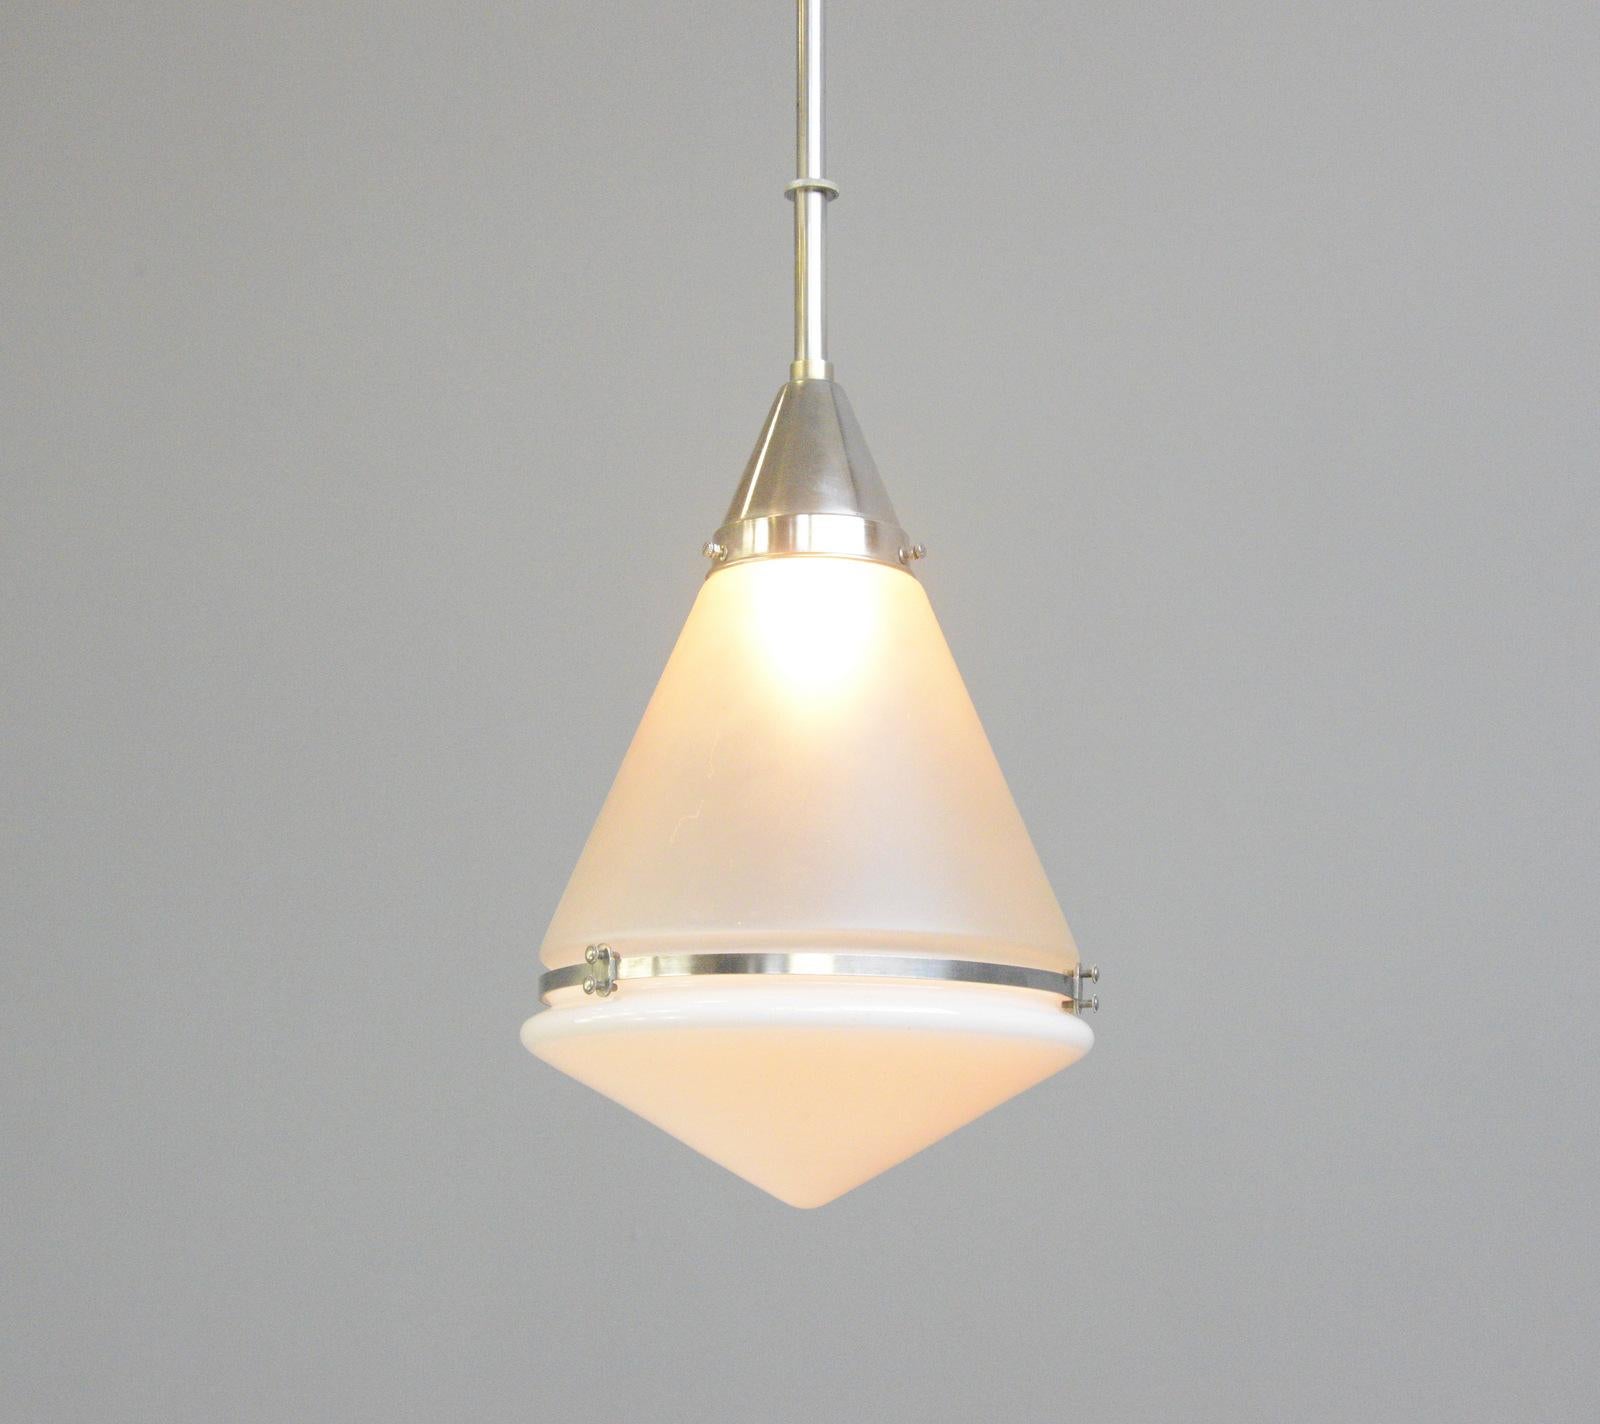 Luzette Pendant Light By Peter Behrens For Siemens Circa 1920s

- Acid etched glass top
- Opaline glass bowl
- Takes E27 fitting bulbs
- Model L1724
- Nickel gallery and rim
- Produced by Siemens & Schukert, Berlin
- Designed by Peter